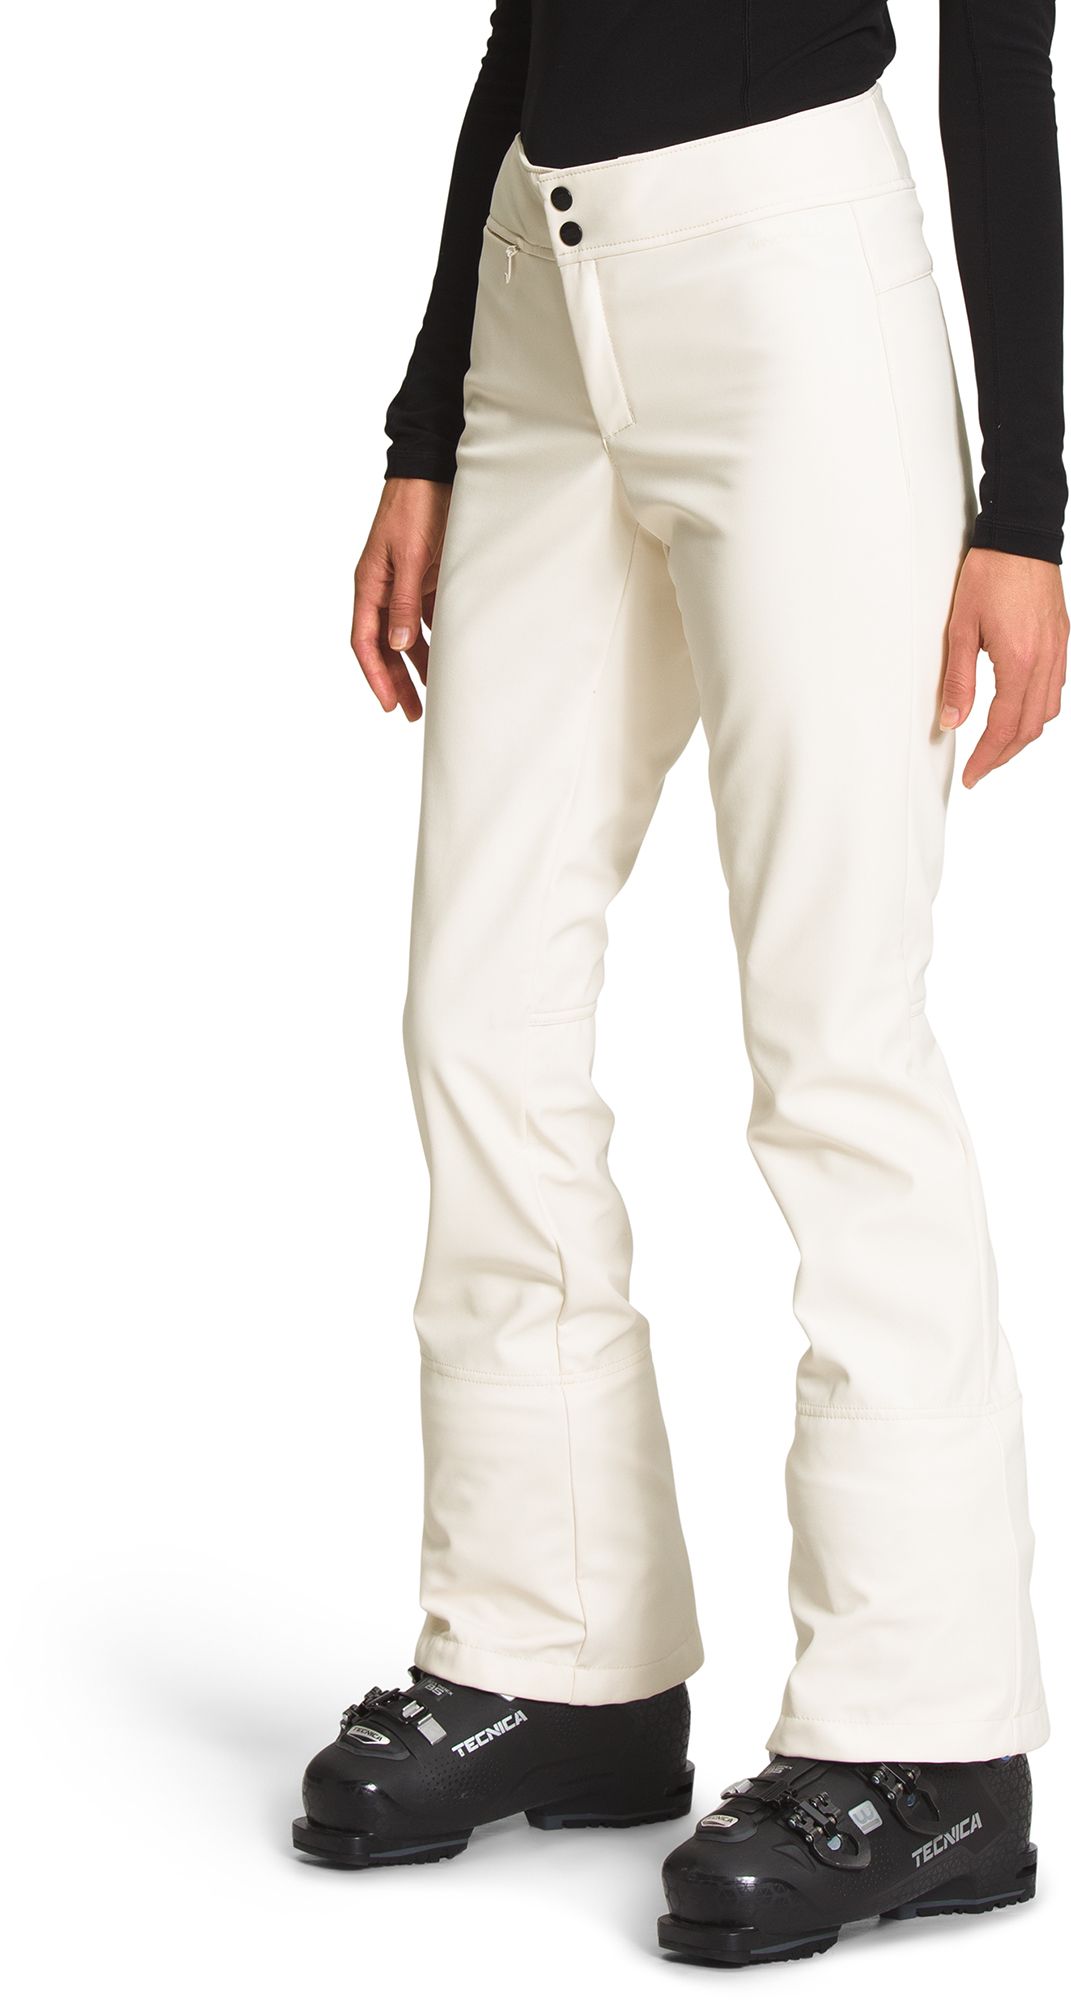 The North Face - Women's Apex Sth Pant